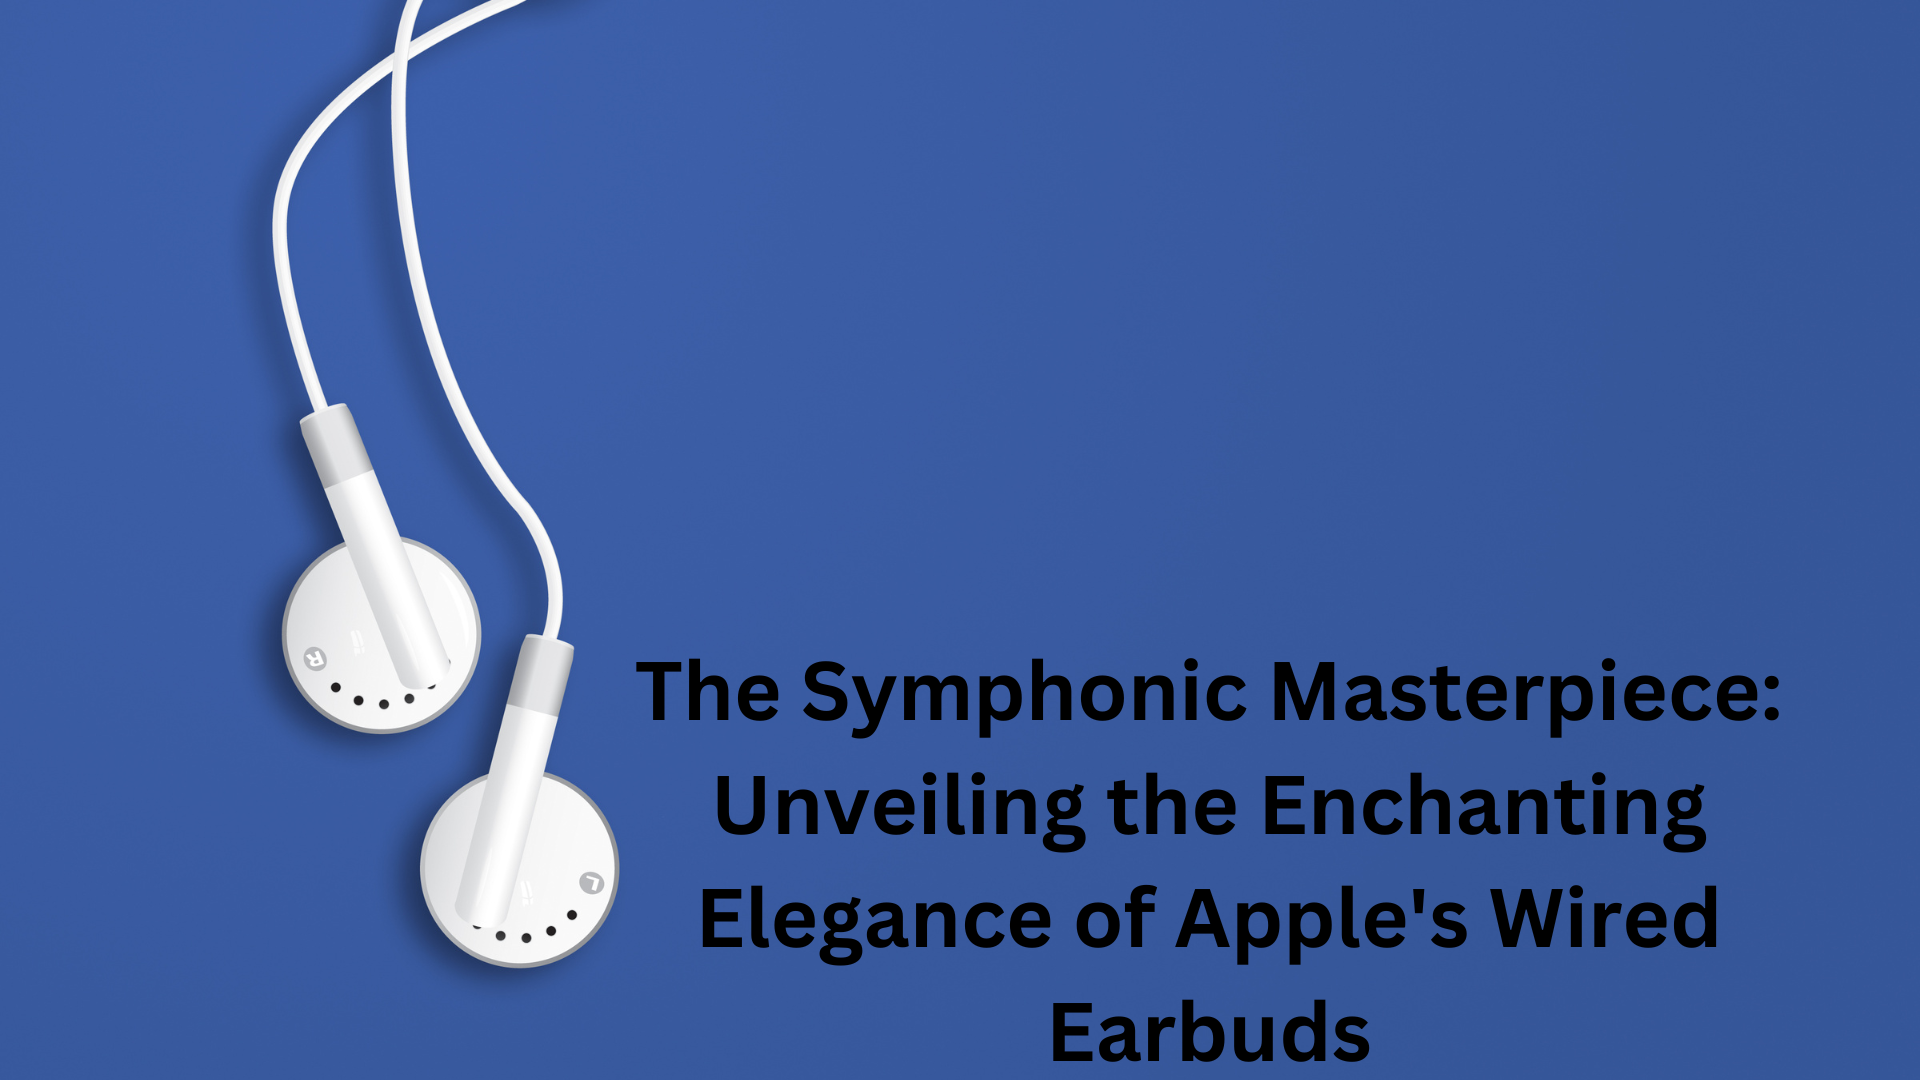 Unveiling the Enchanting Elegance of Apples Wired Earbuds